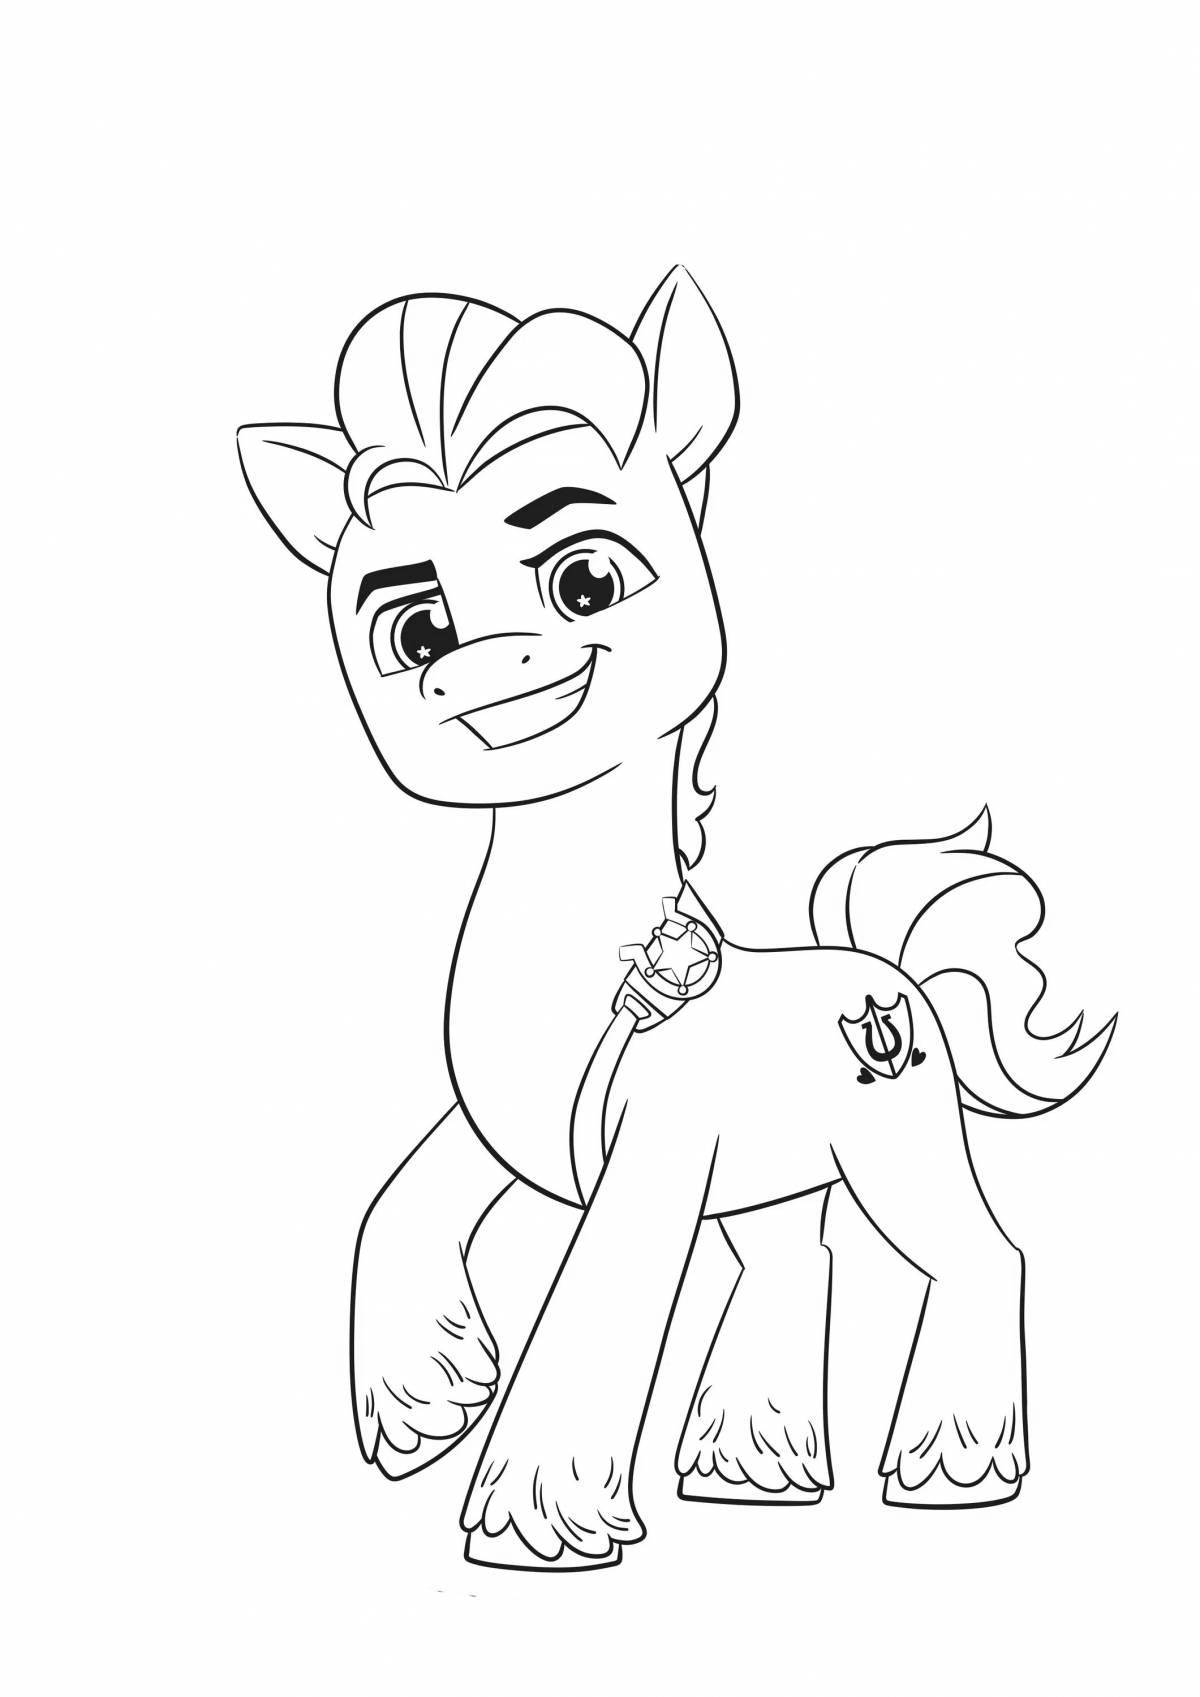 New generation magical little pony coloring book